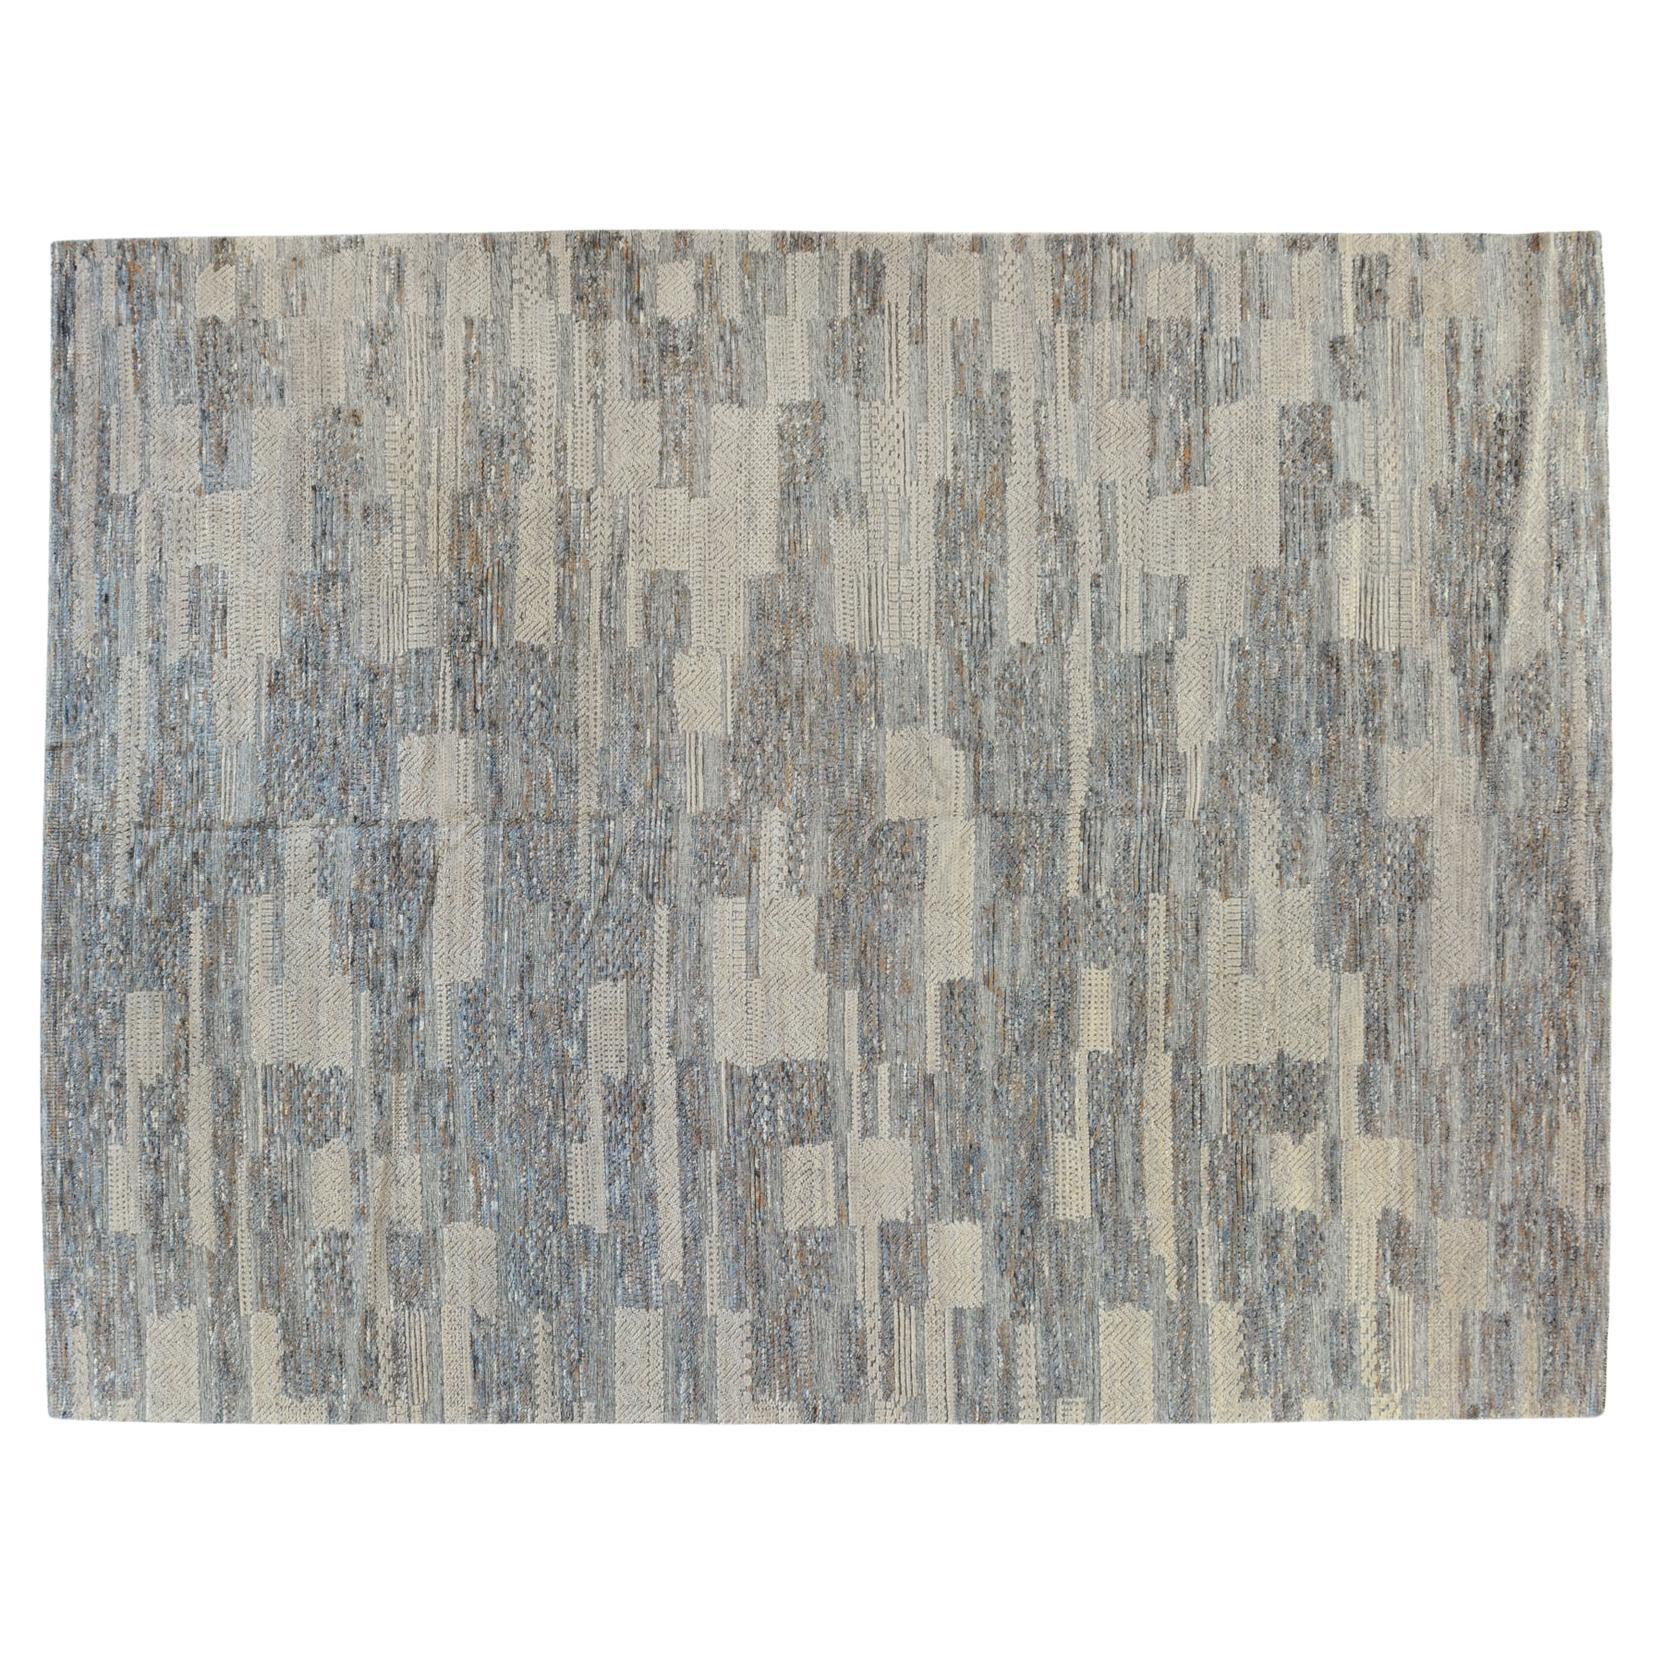 Blue, Brown and Beige Contemporary Patchwork Area Rug